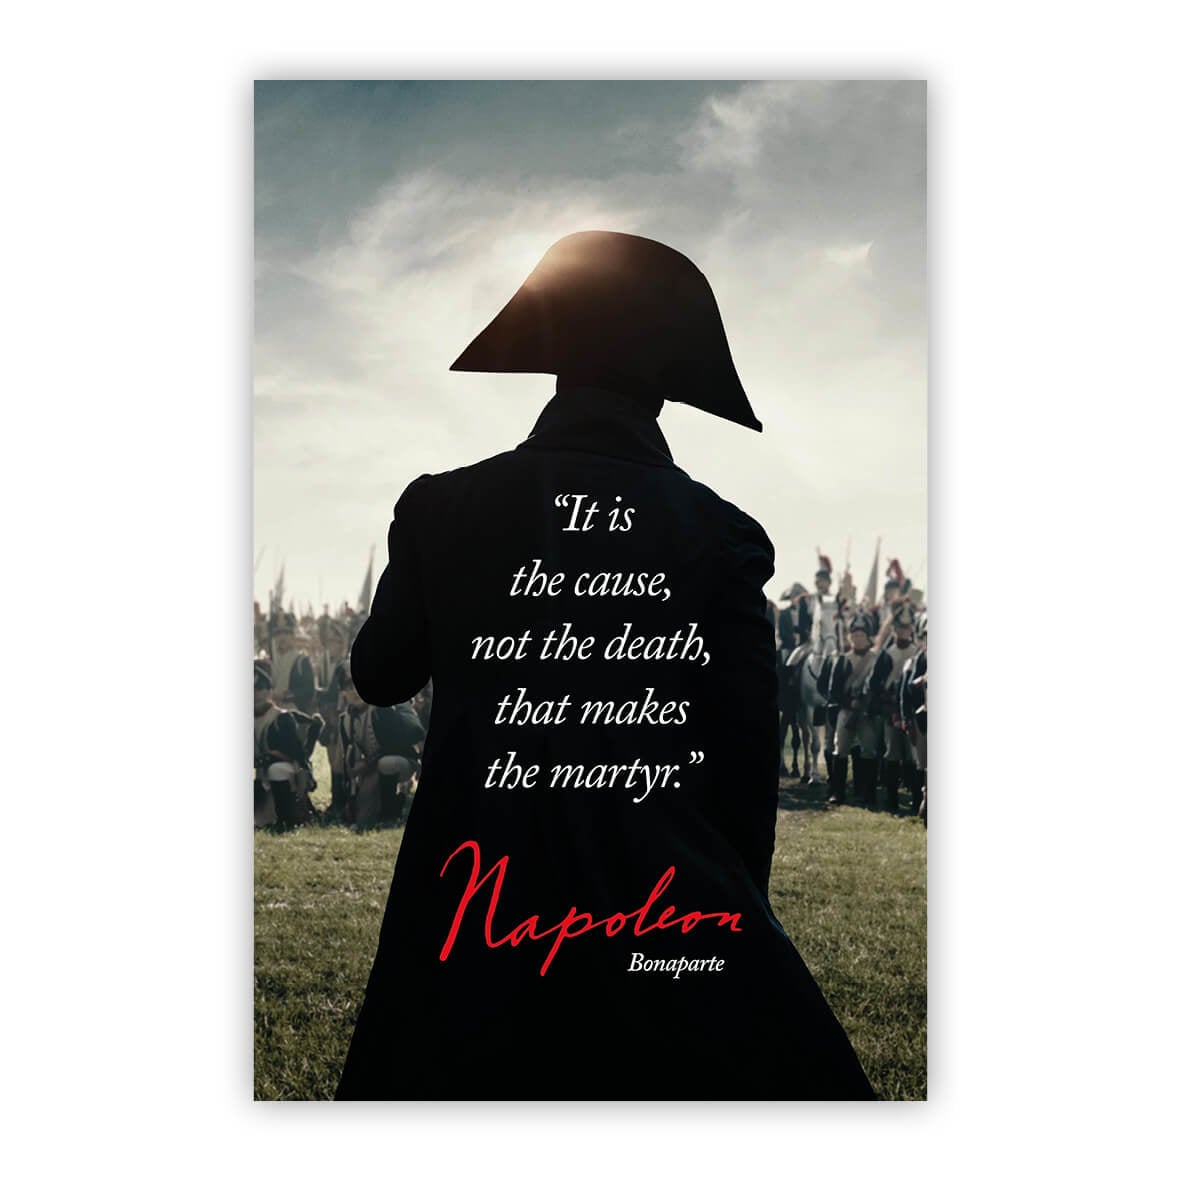 It is the cause, not the death, that makes the martyr. - Napoleon Bonaparte